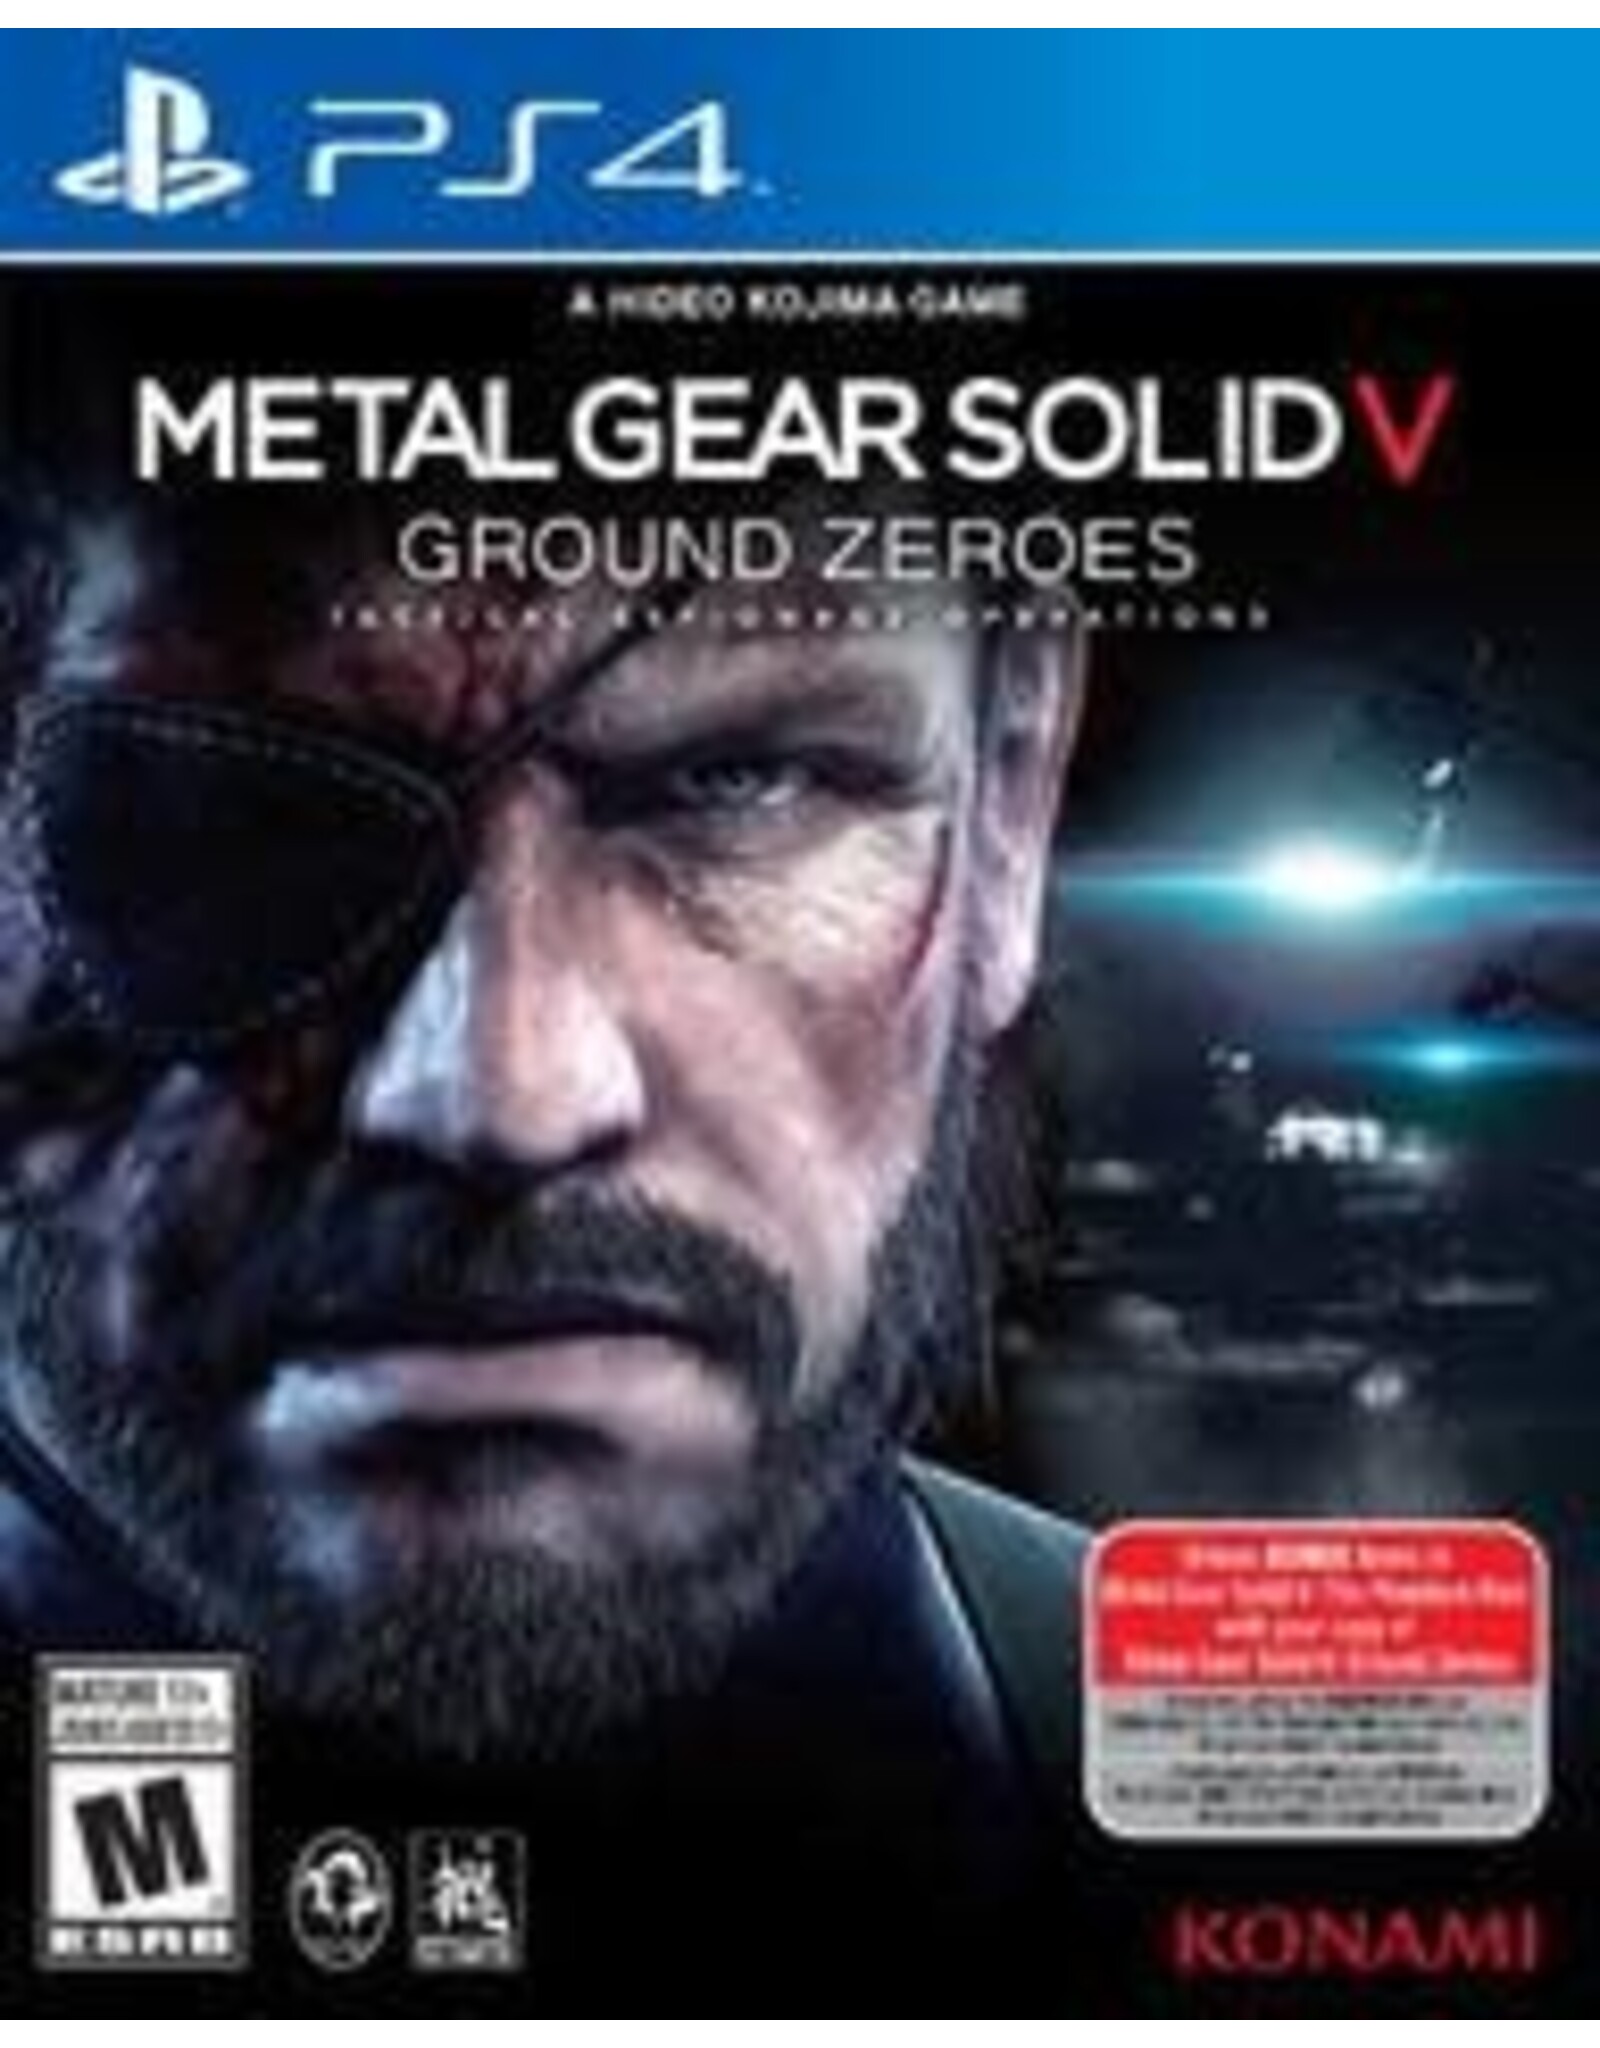 Playstation 4 Metal Gear Solid V: Ground Zeroes (Used)